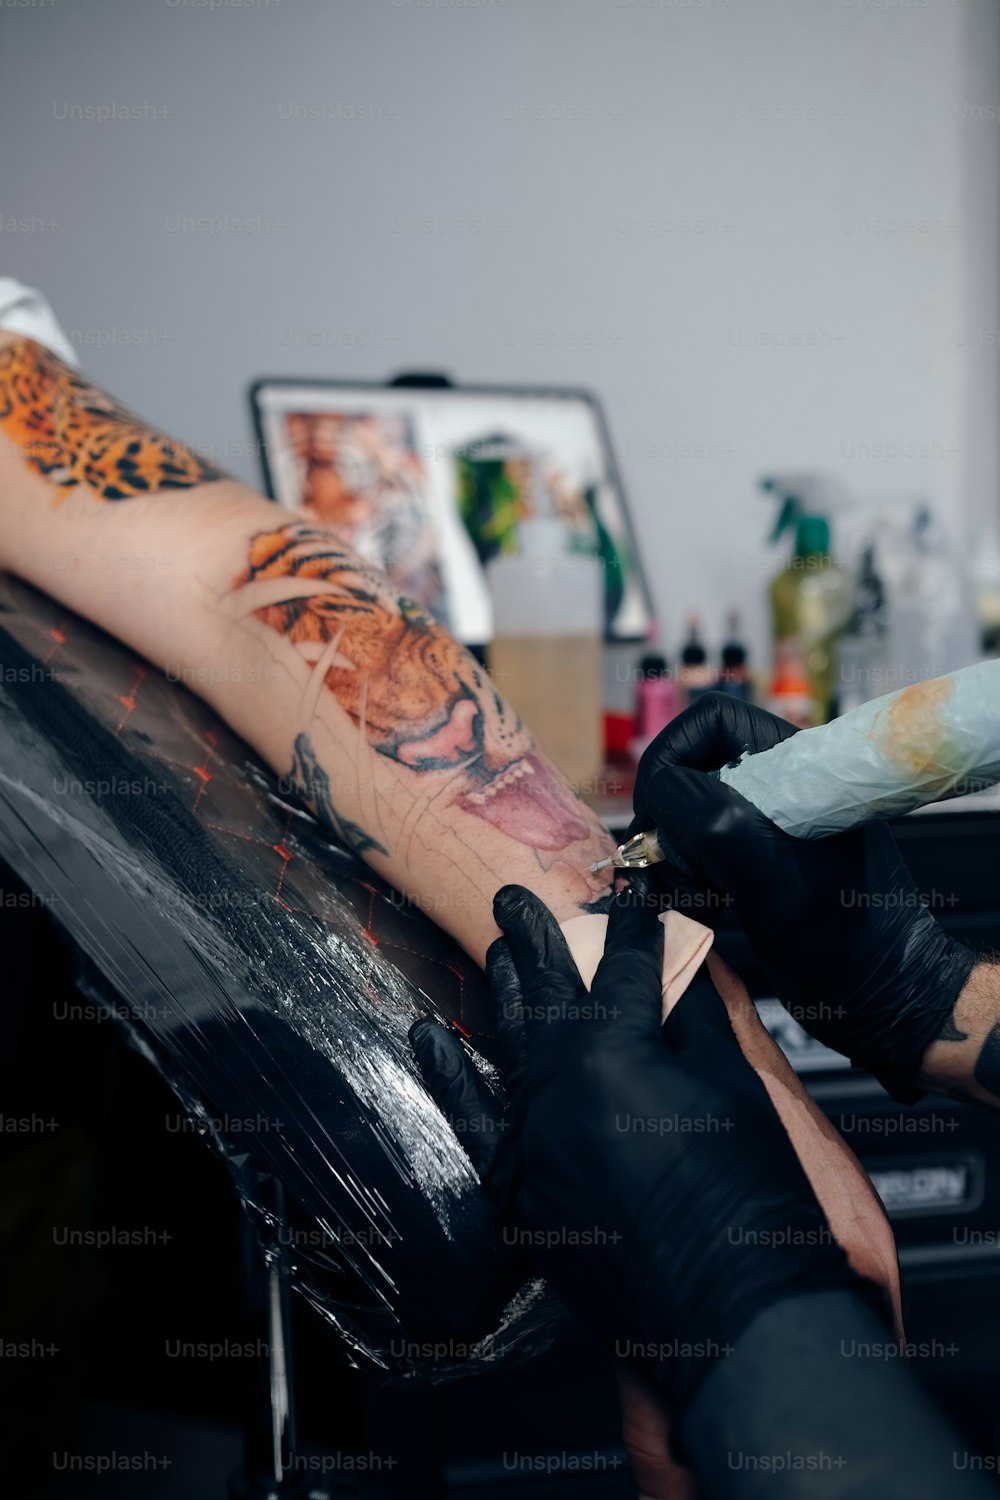 a person getting a tattoo on another person's arm